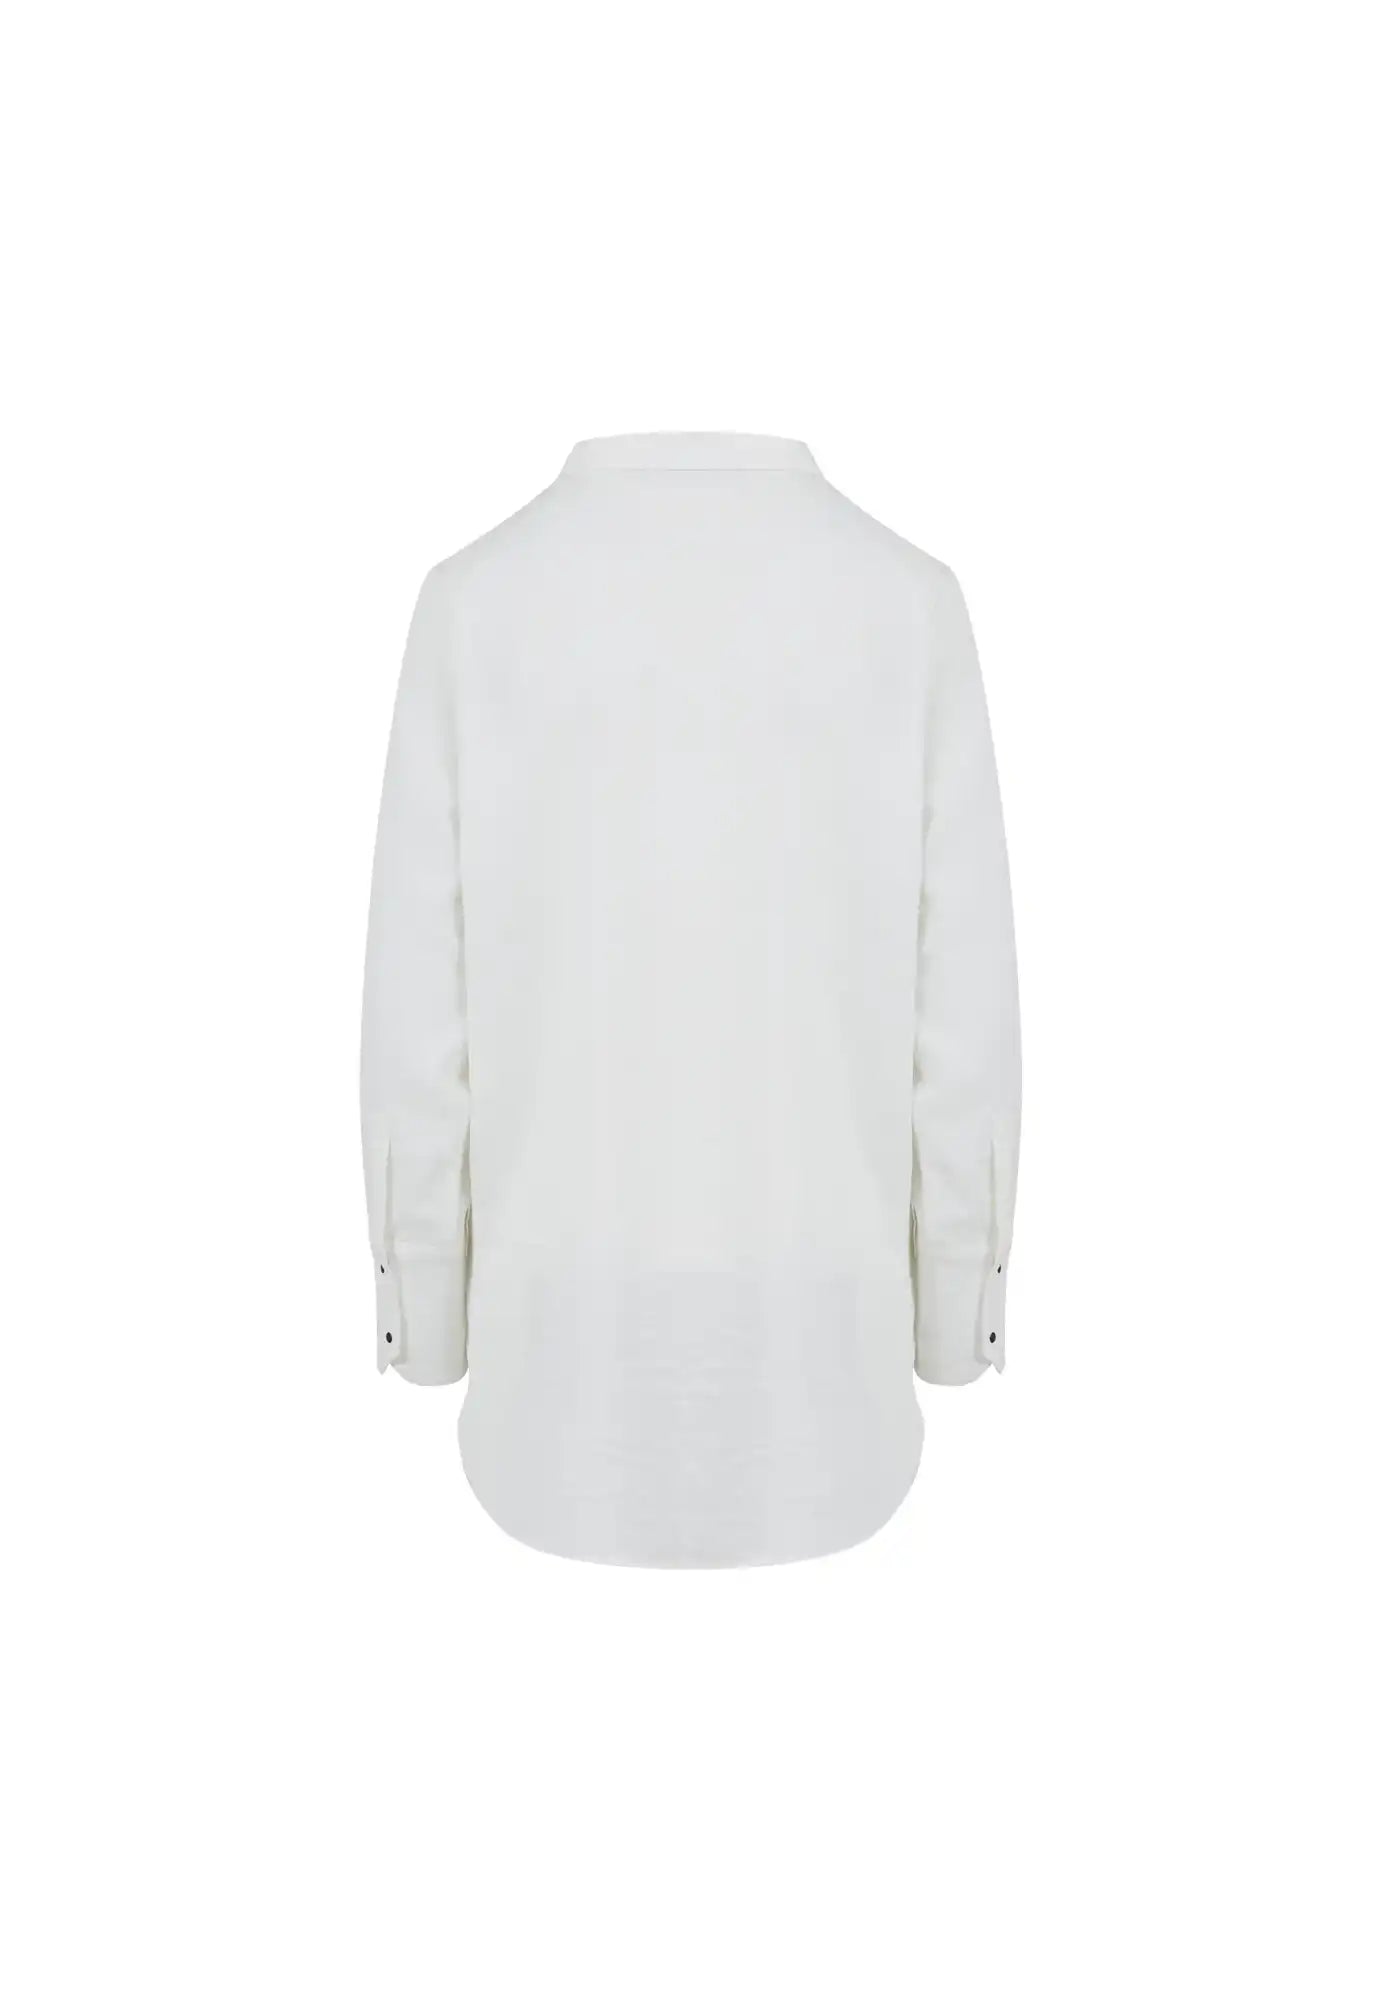 coster copenhagen - shirt with pockets - white